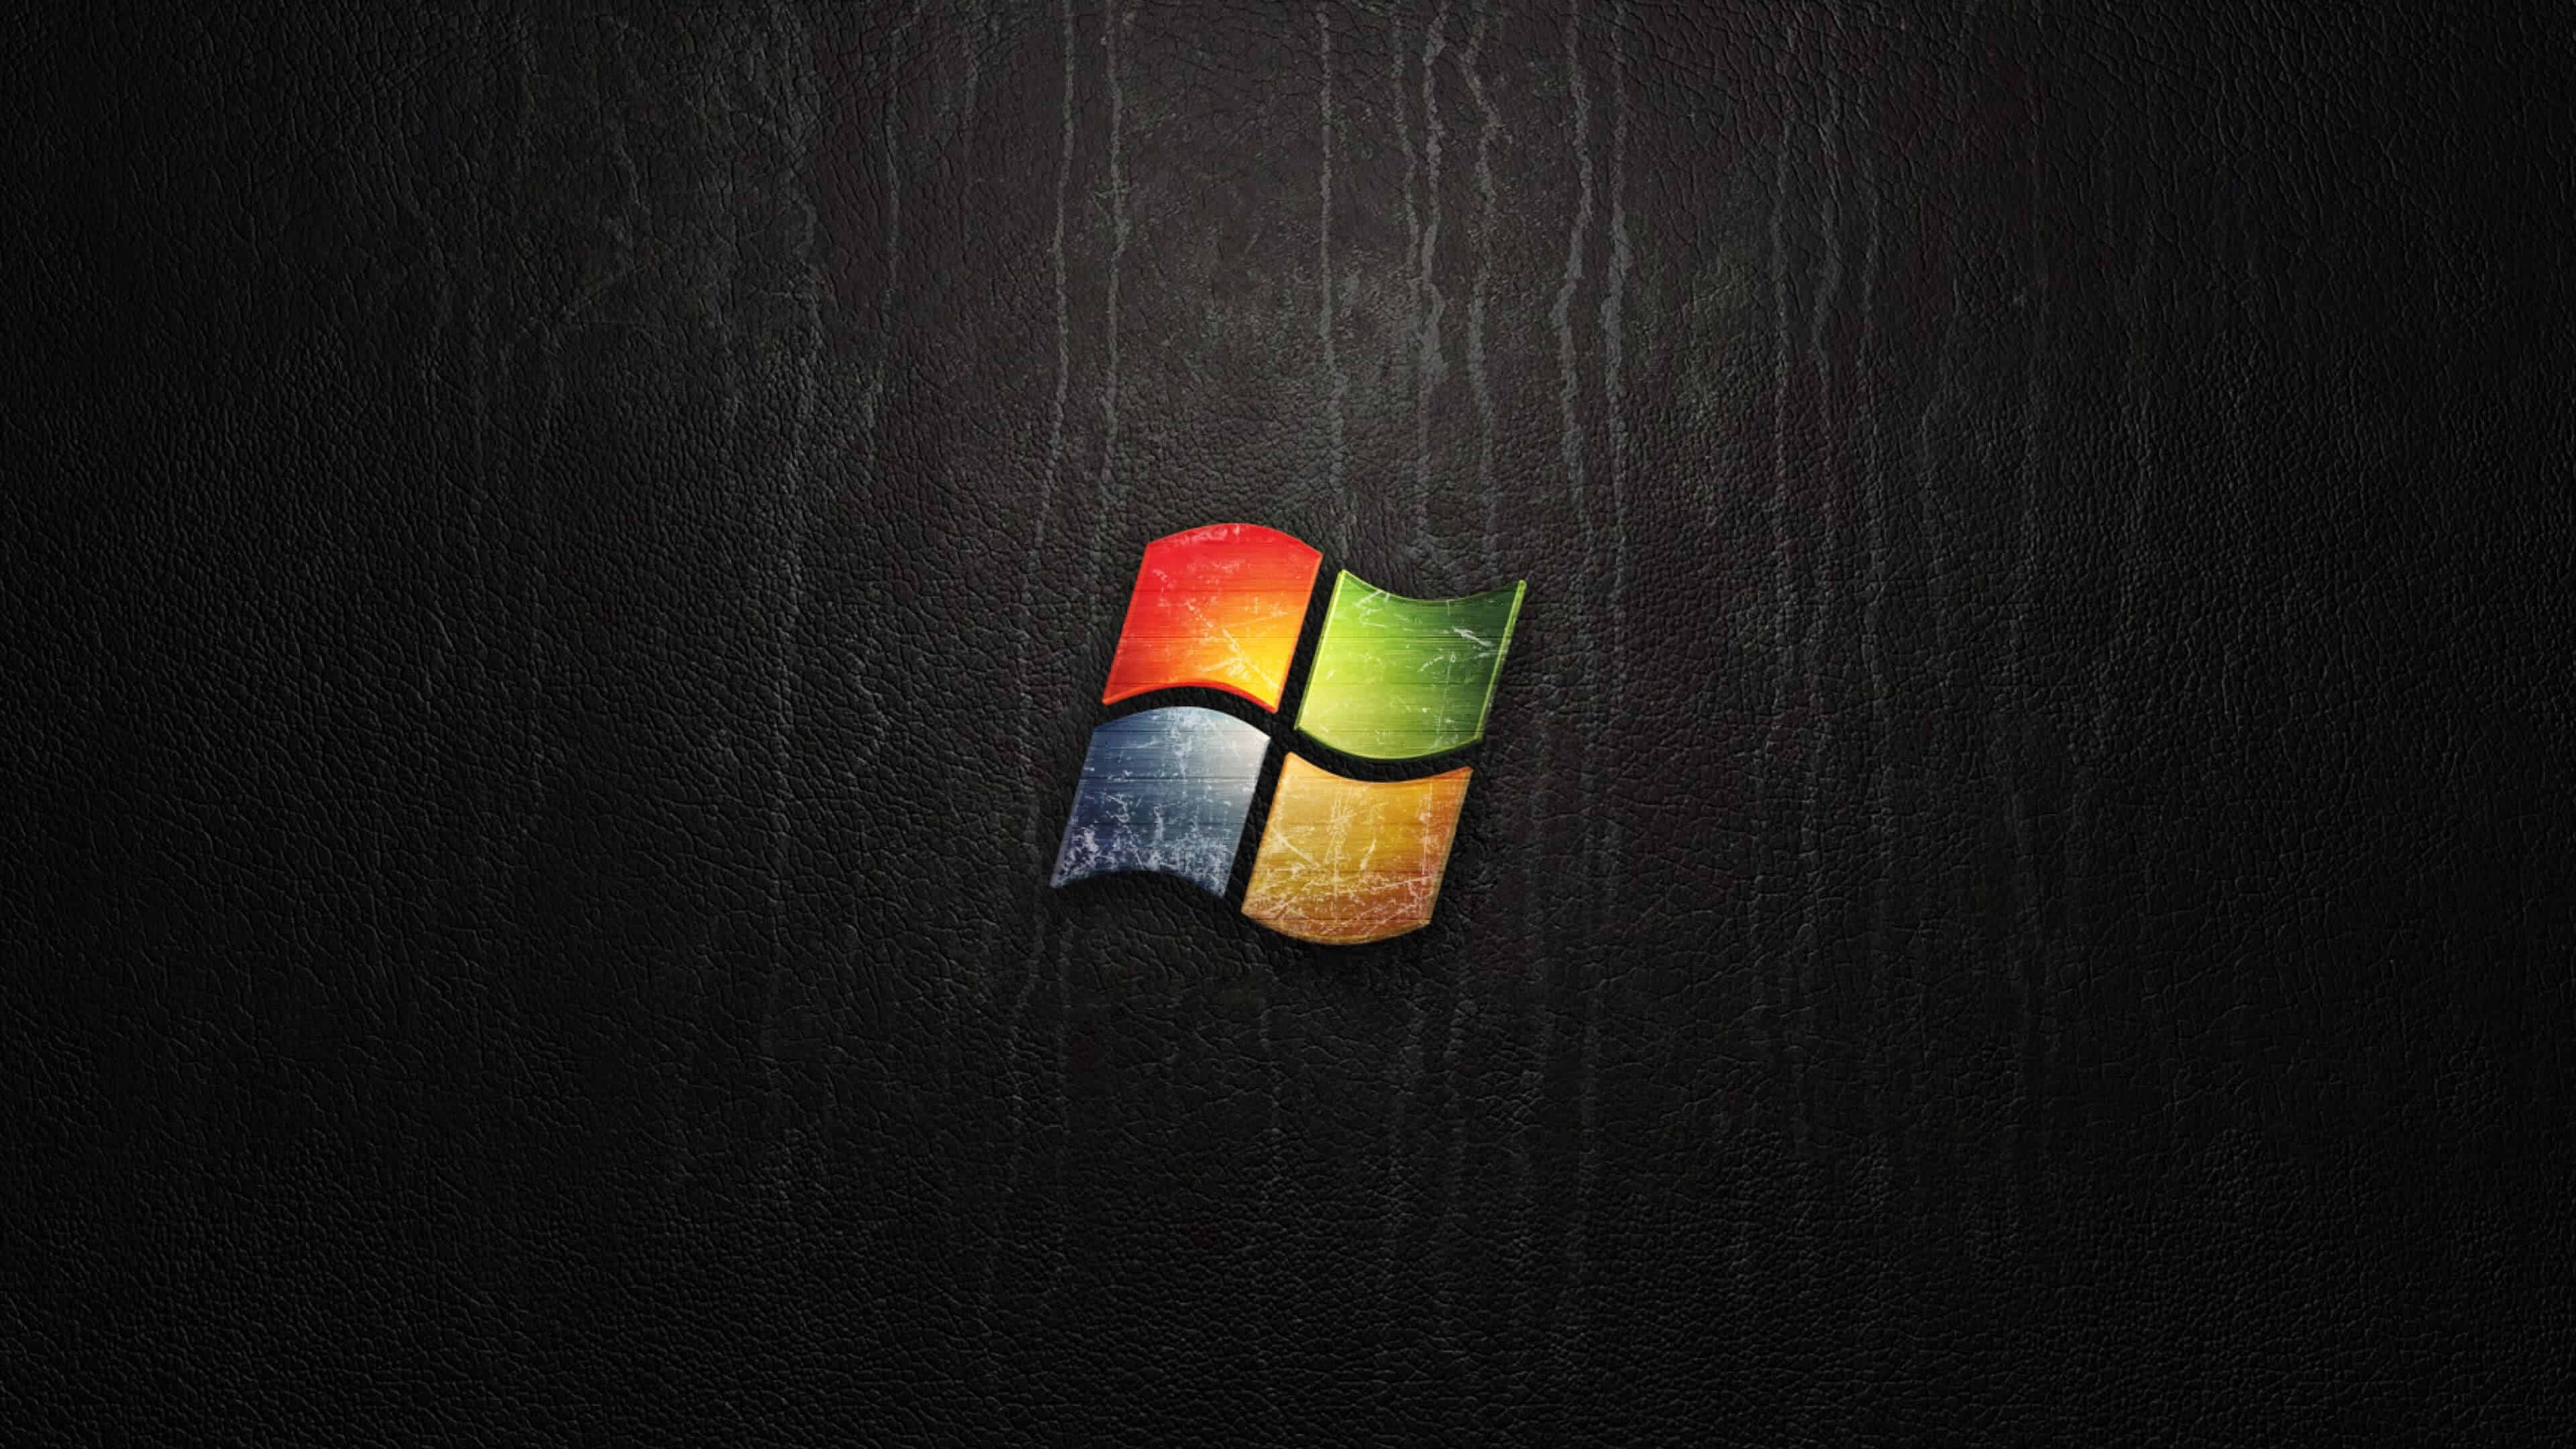 Microsoft: Windows logo, Developers of the Surface lineup of touchscreen personal computers. 3840x2160 4K Wallpaper.